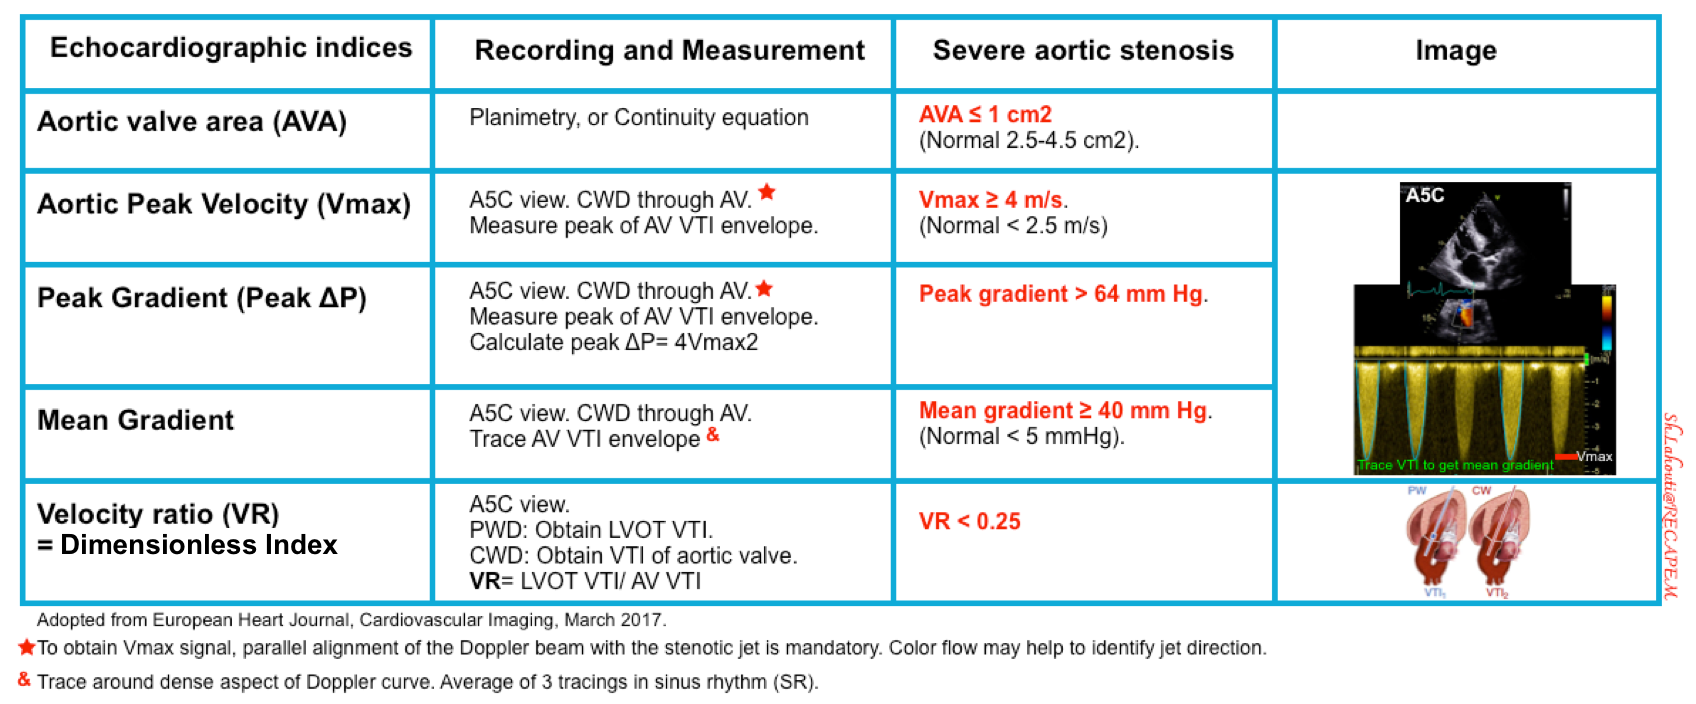 aortic stenosis severe